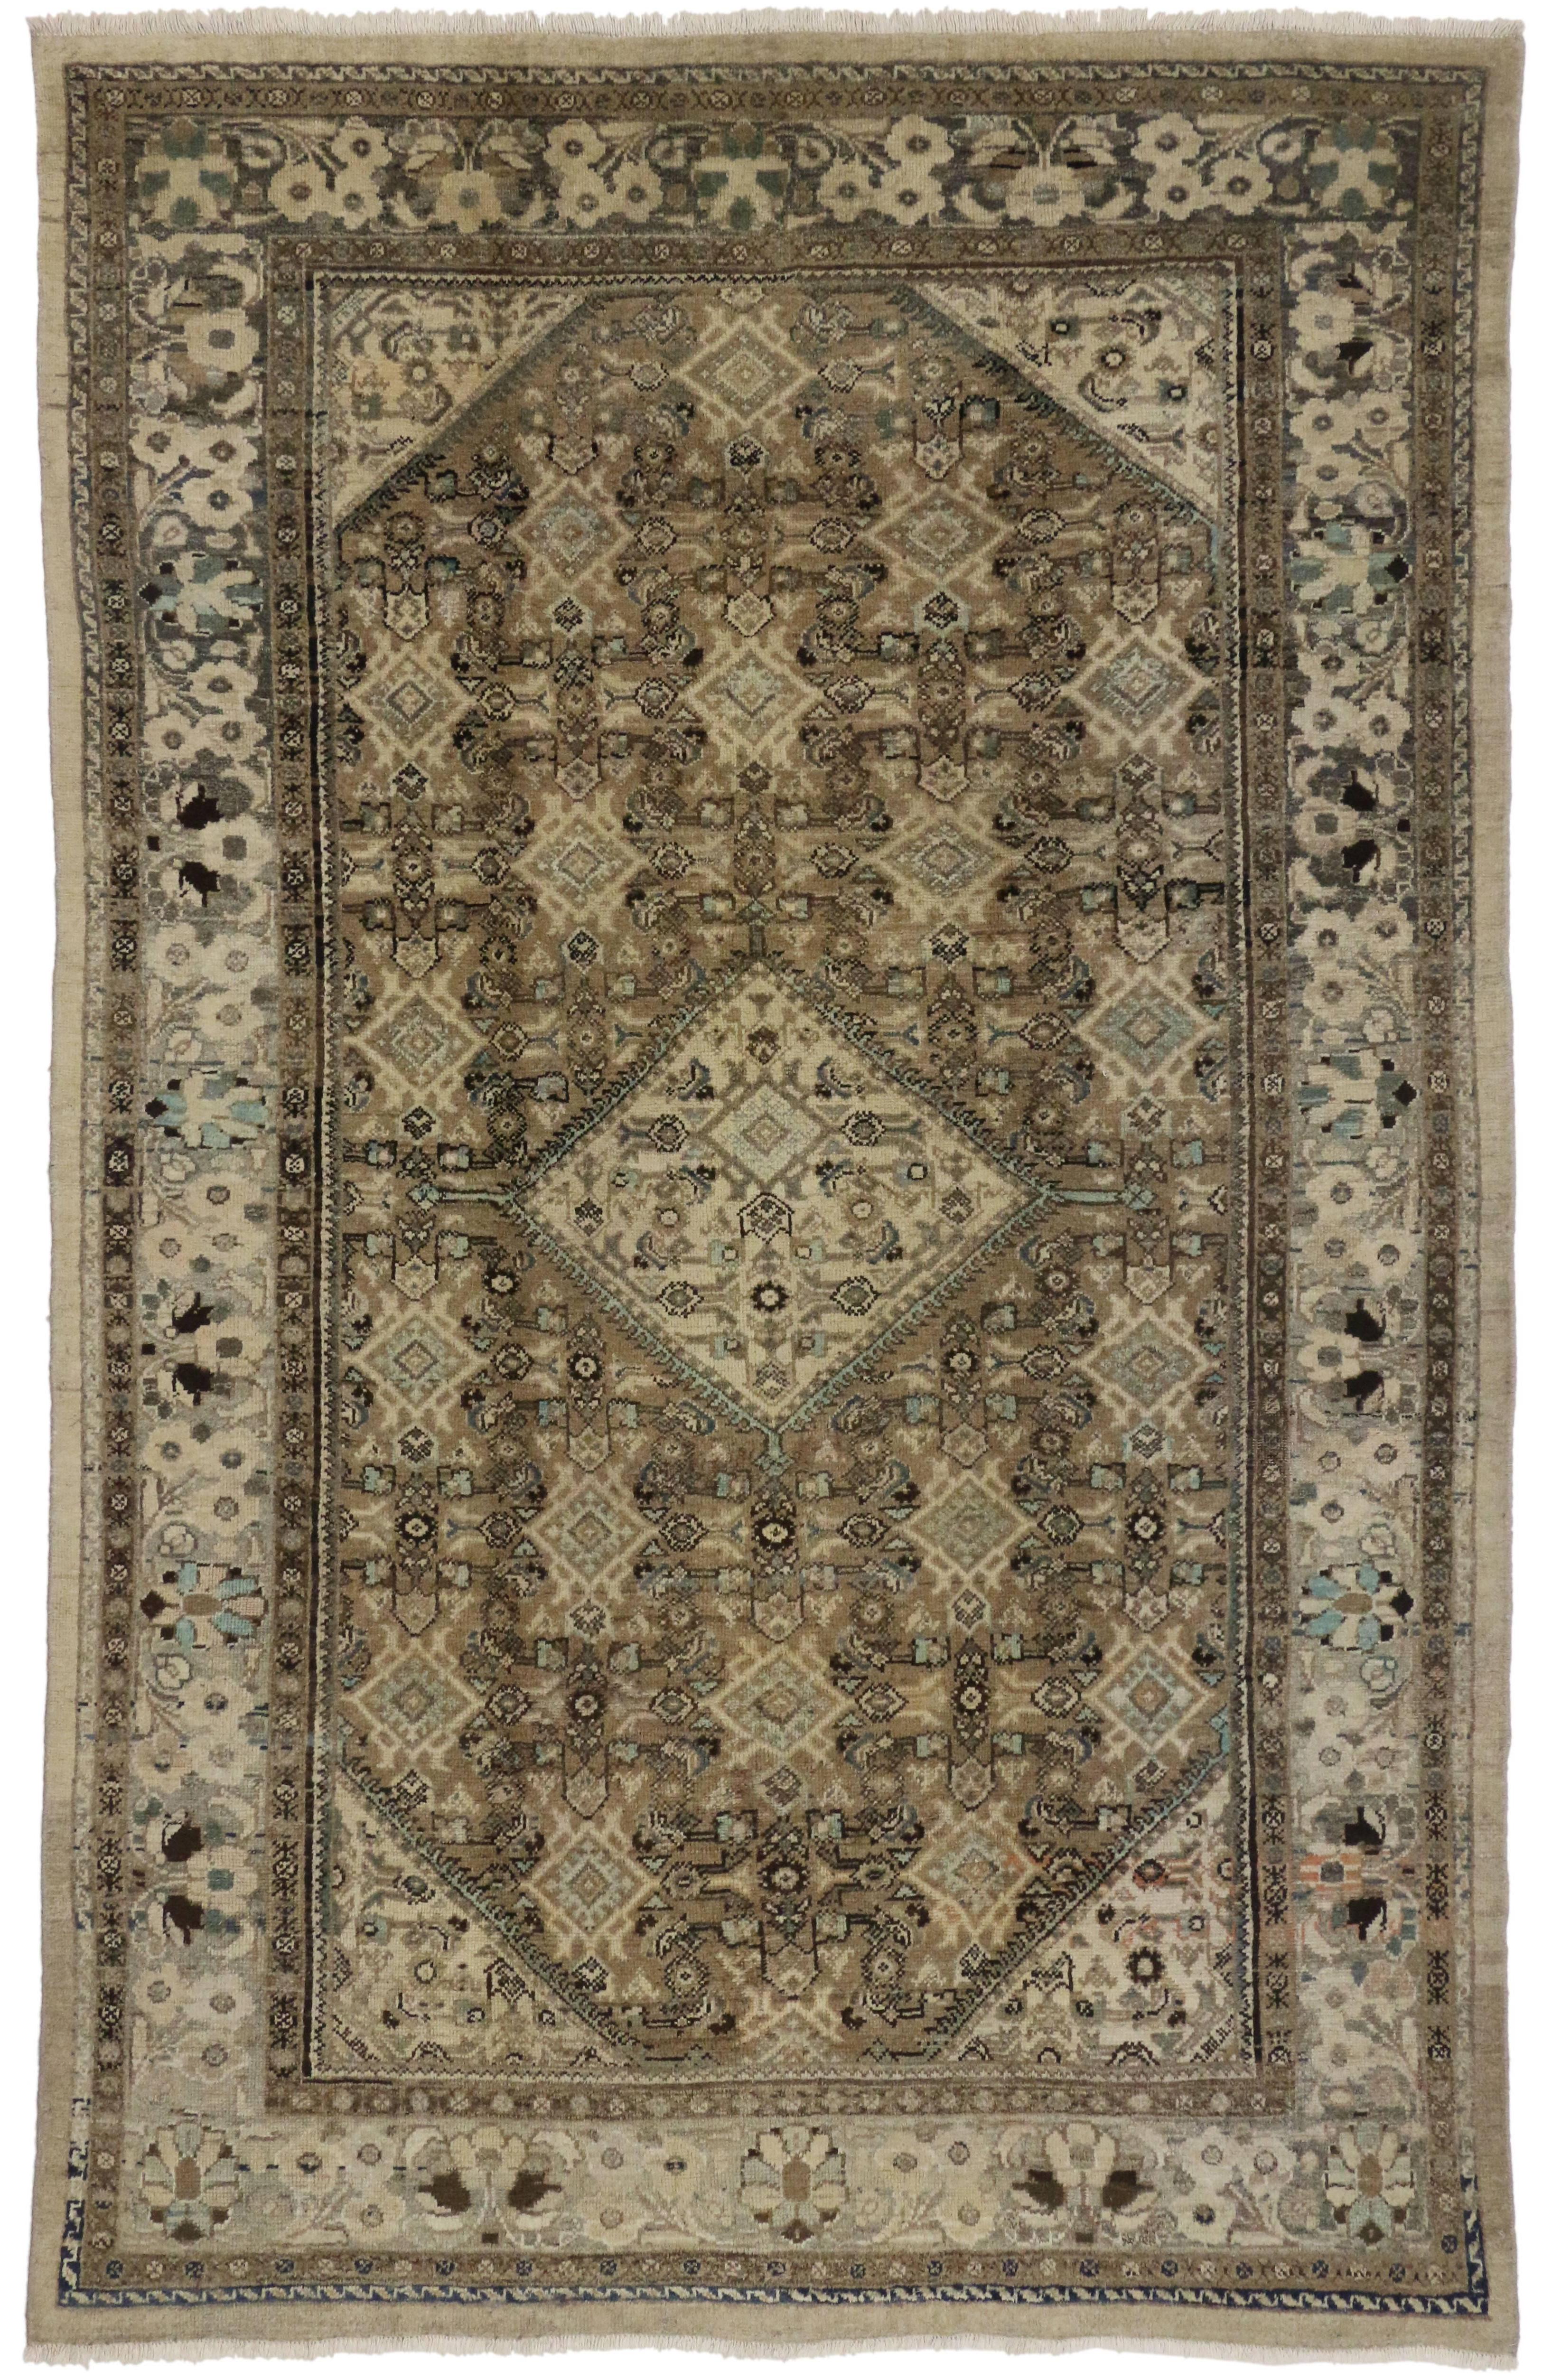 76505 Vintage Persian Mahal Rug with Rustic Chippendale Style 06'10 x 10'10. With its neutral colors and weathered beauty combined with nostalgic charm, this vintage Persian Mahal rug creates an inimitable warmth and calming ambiance.  The abrashed